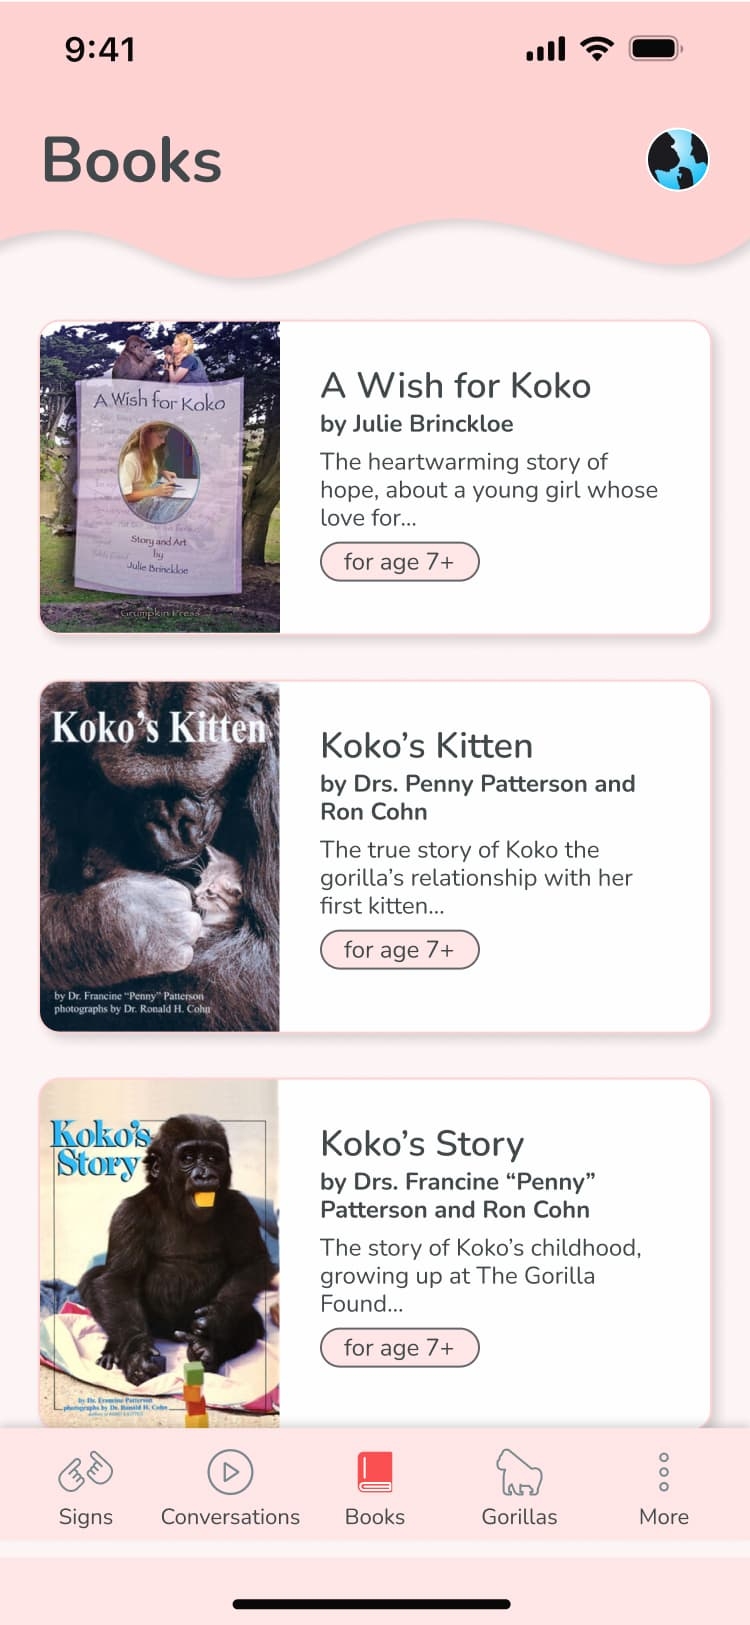 A mobile phone screen displaying the Koko Signs app with a pink theme. The app shows a list of four books with their cover images, titles, authors, and short descriptions. The top bar reads "Books.